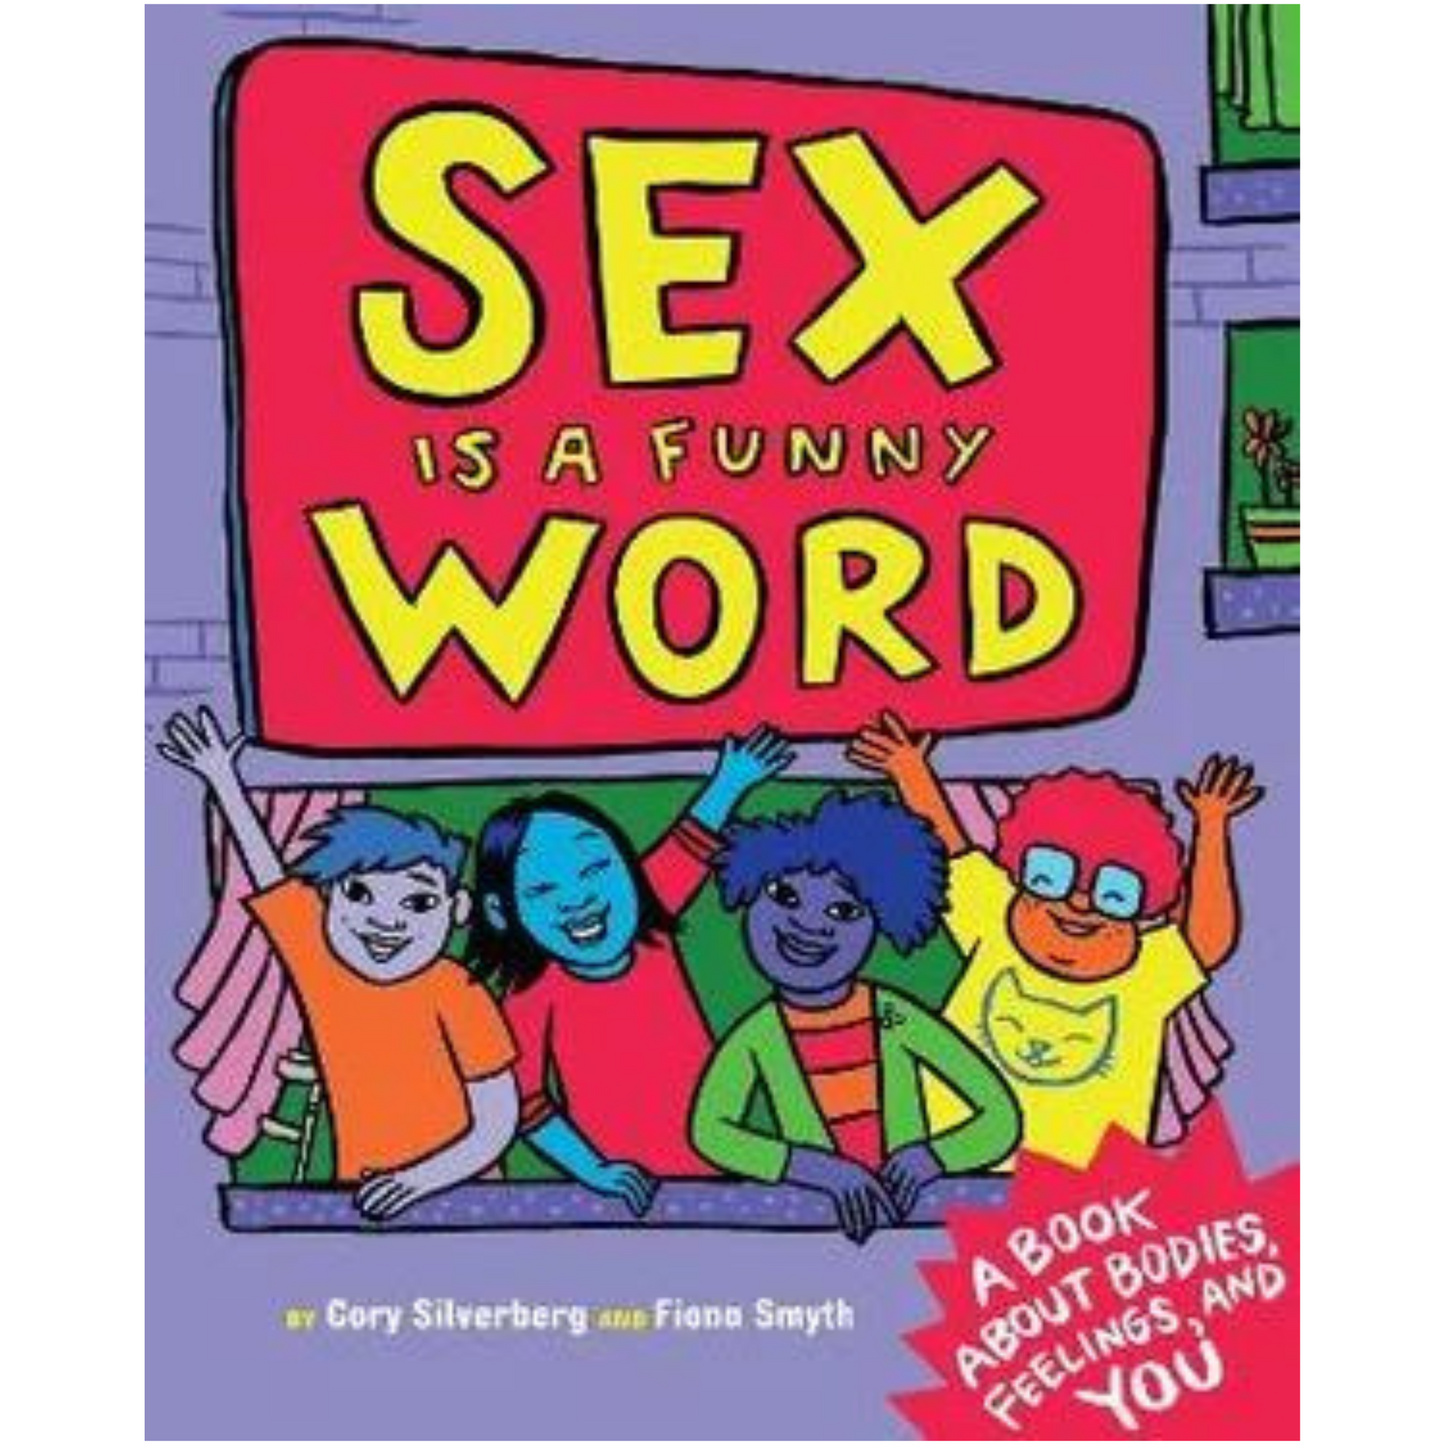 Sex_is_a_funny_word_book